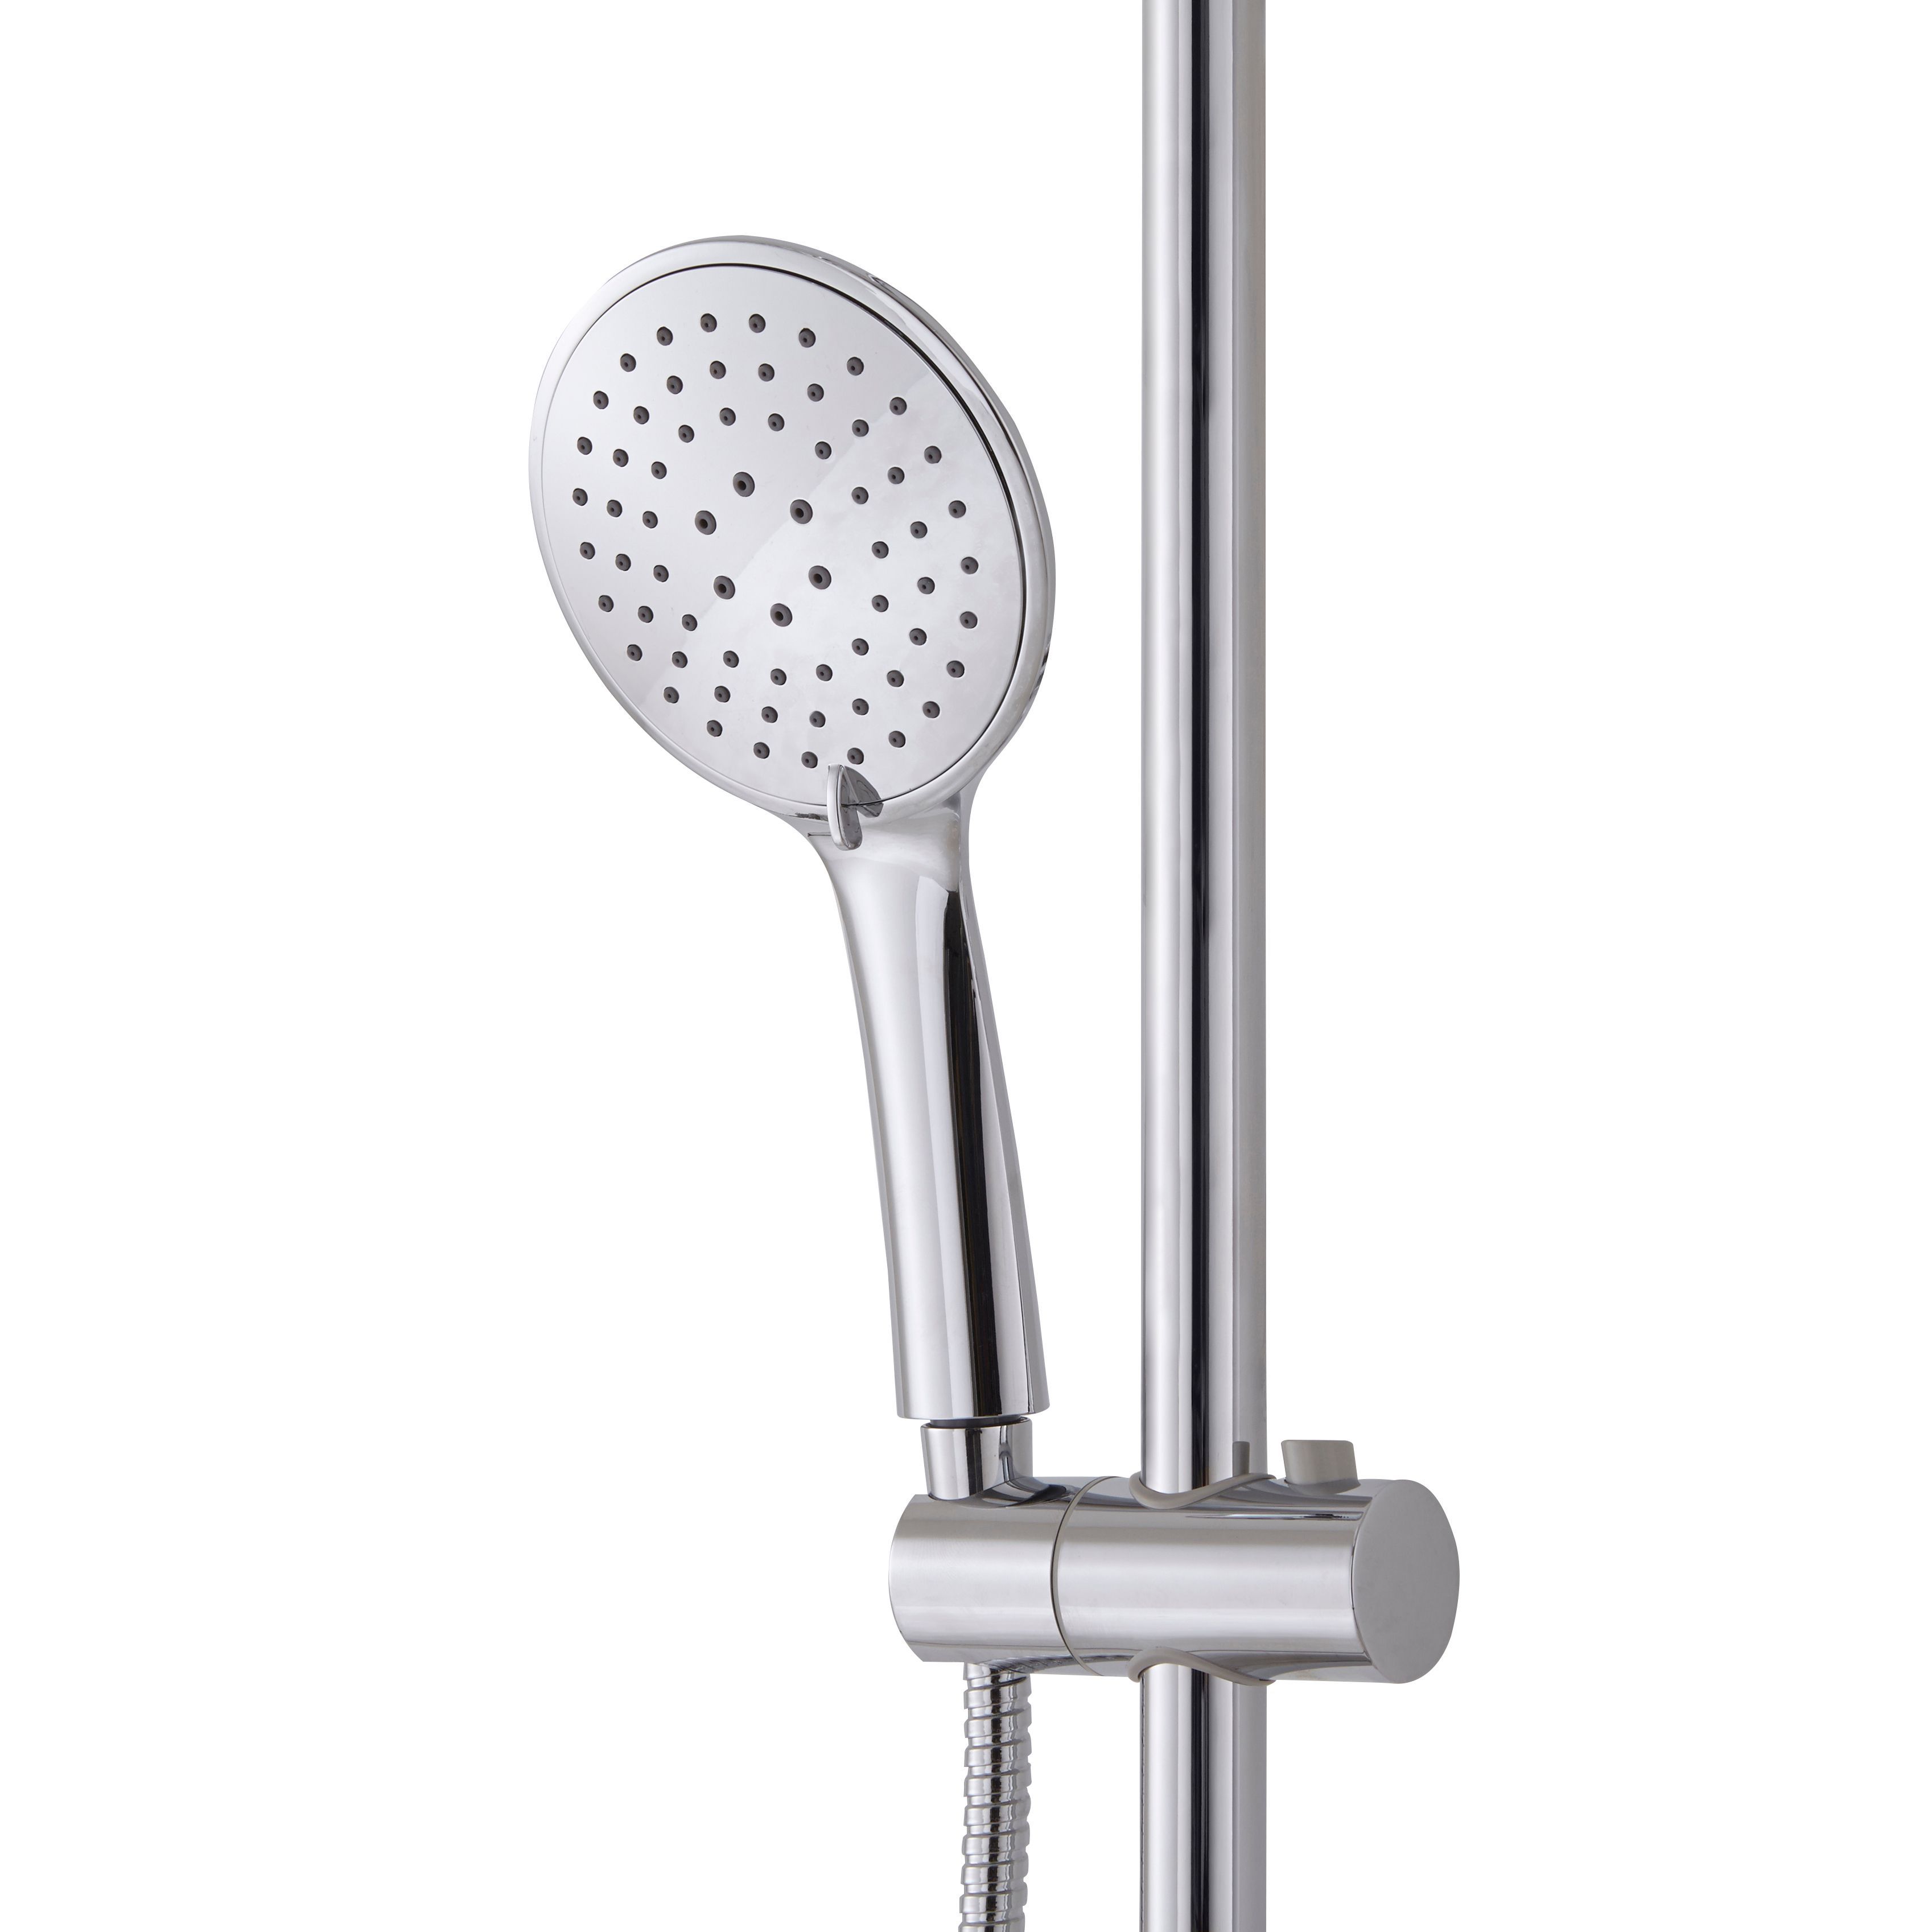 Cooke & Lewis CHROME effect Wall-mounted Thermostatic Mixer Shower